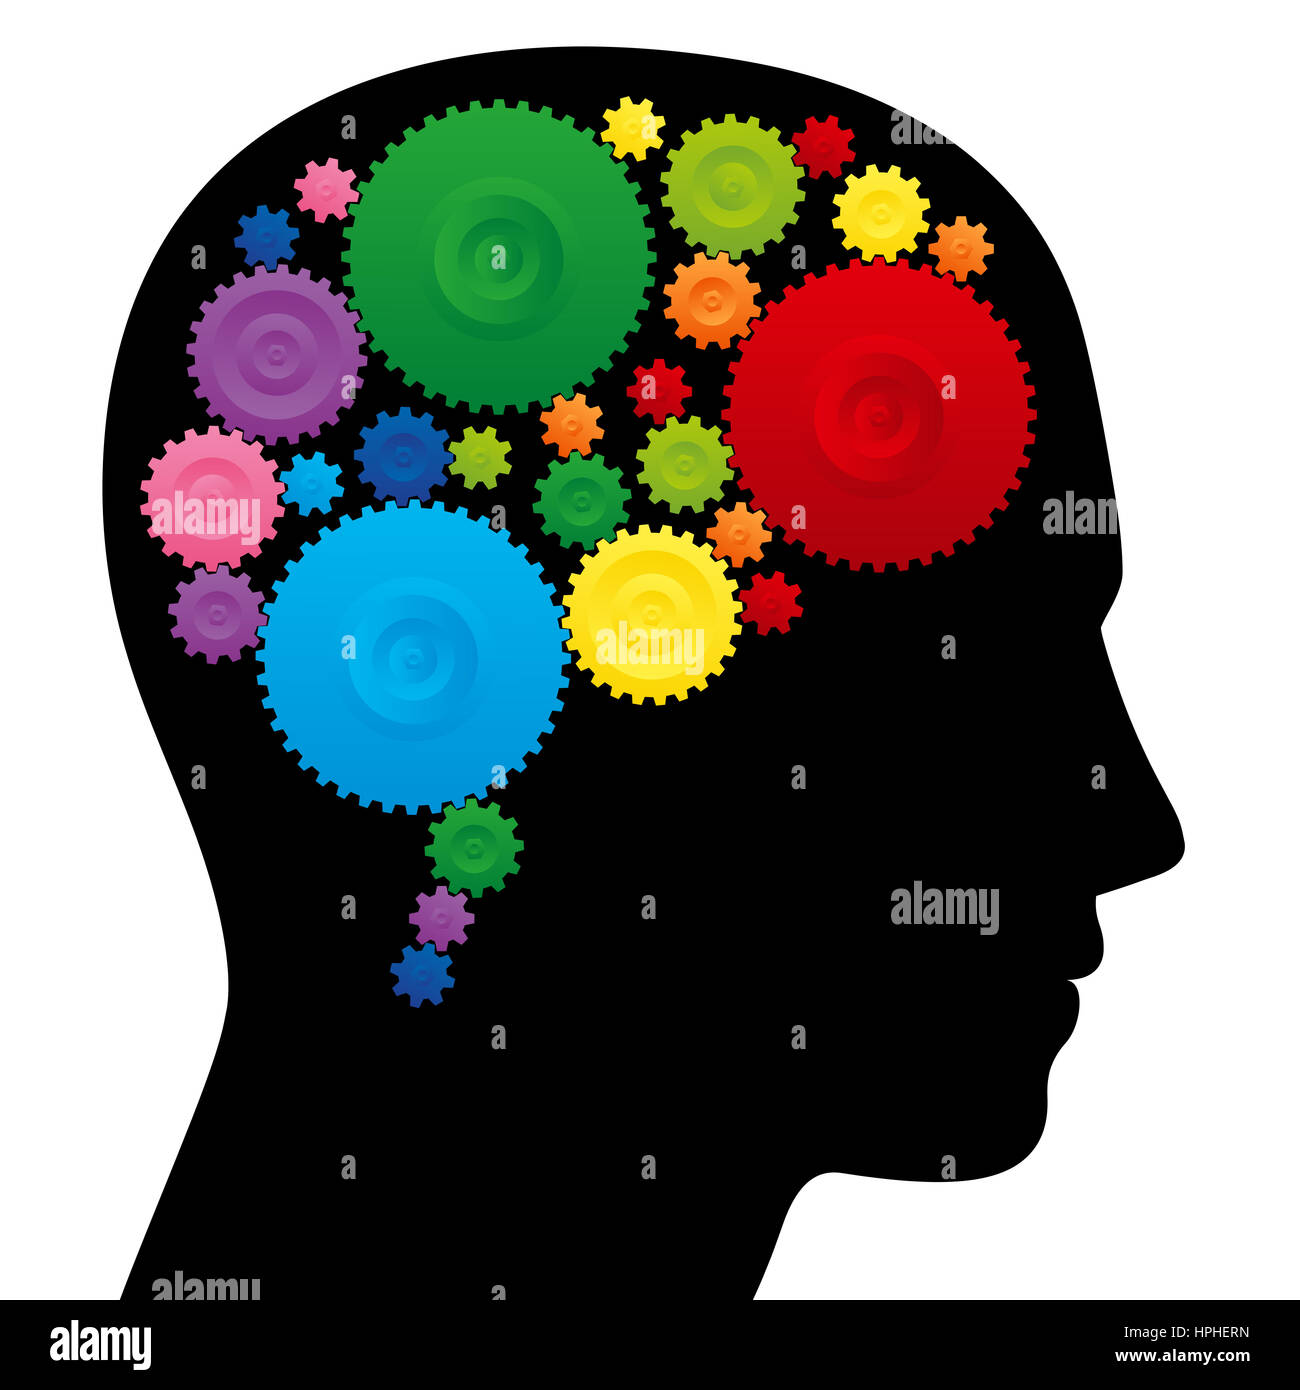 Brain with colorful cog wheels, as a symbol for creativity, ingenuity or intelligence. Stock Photo